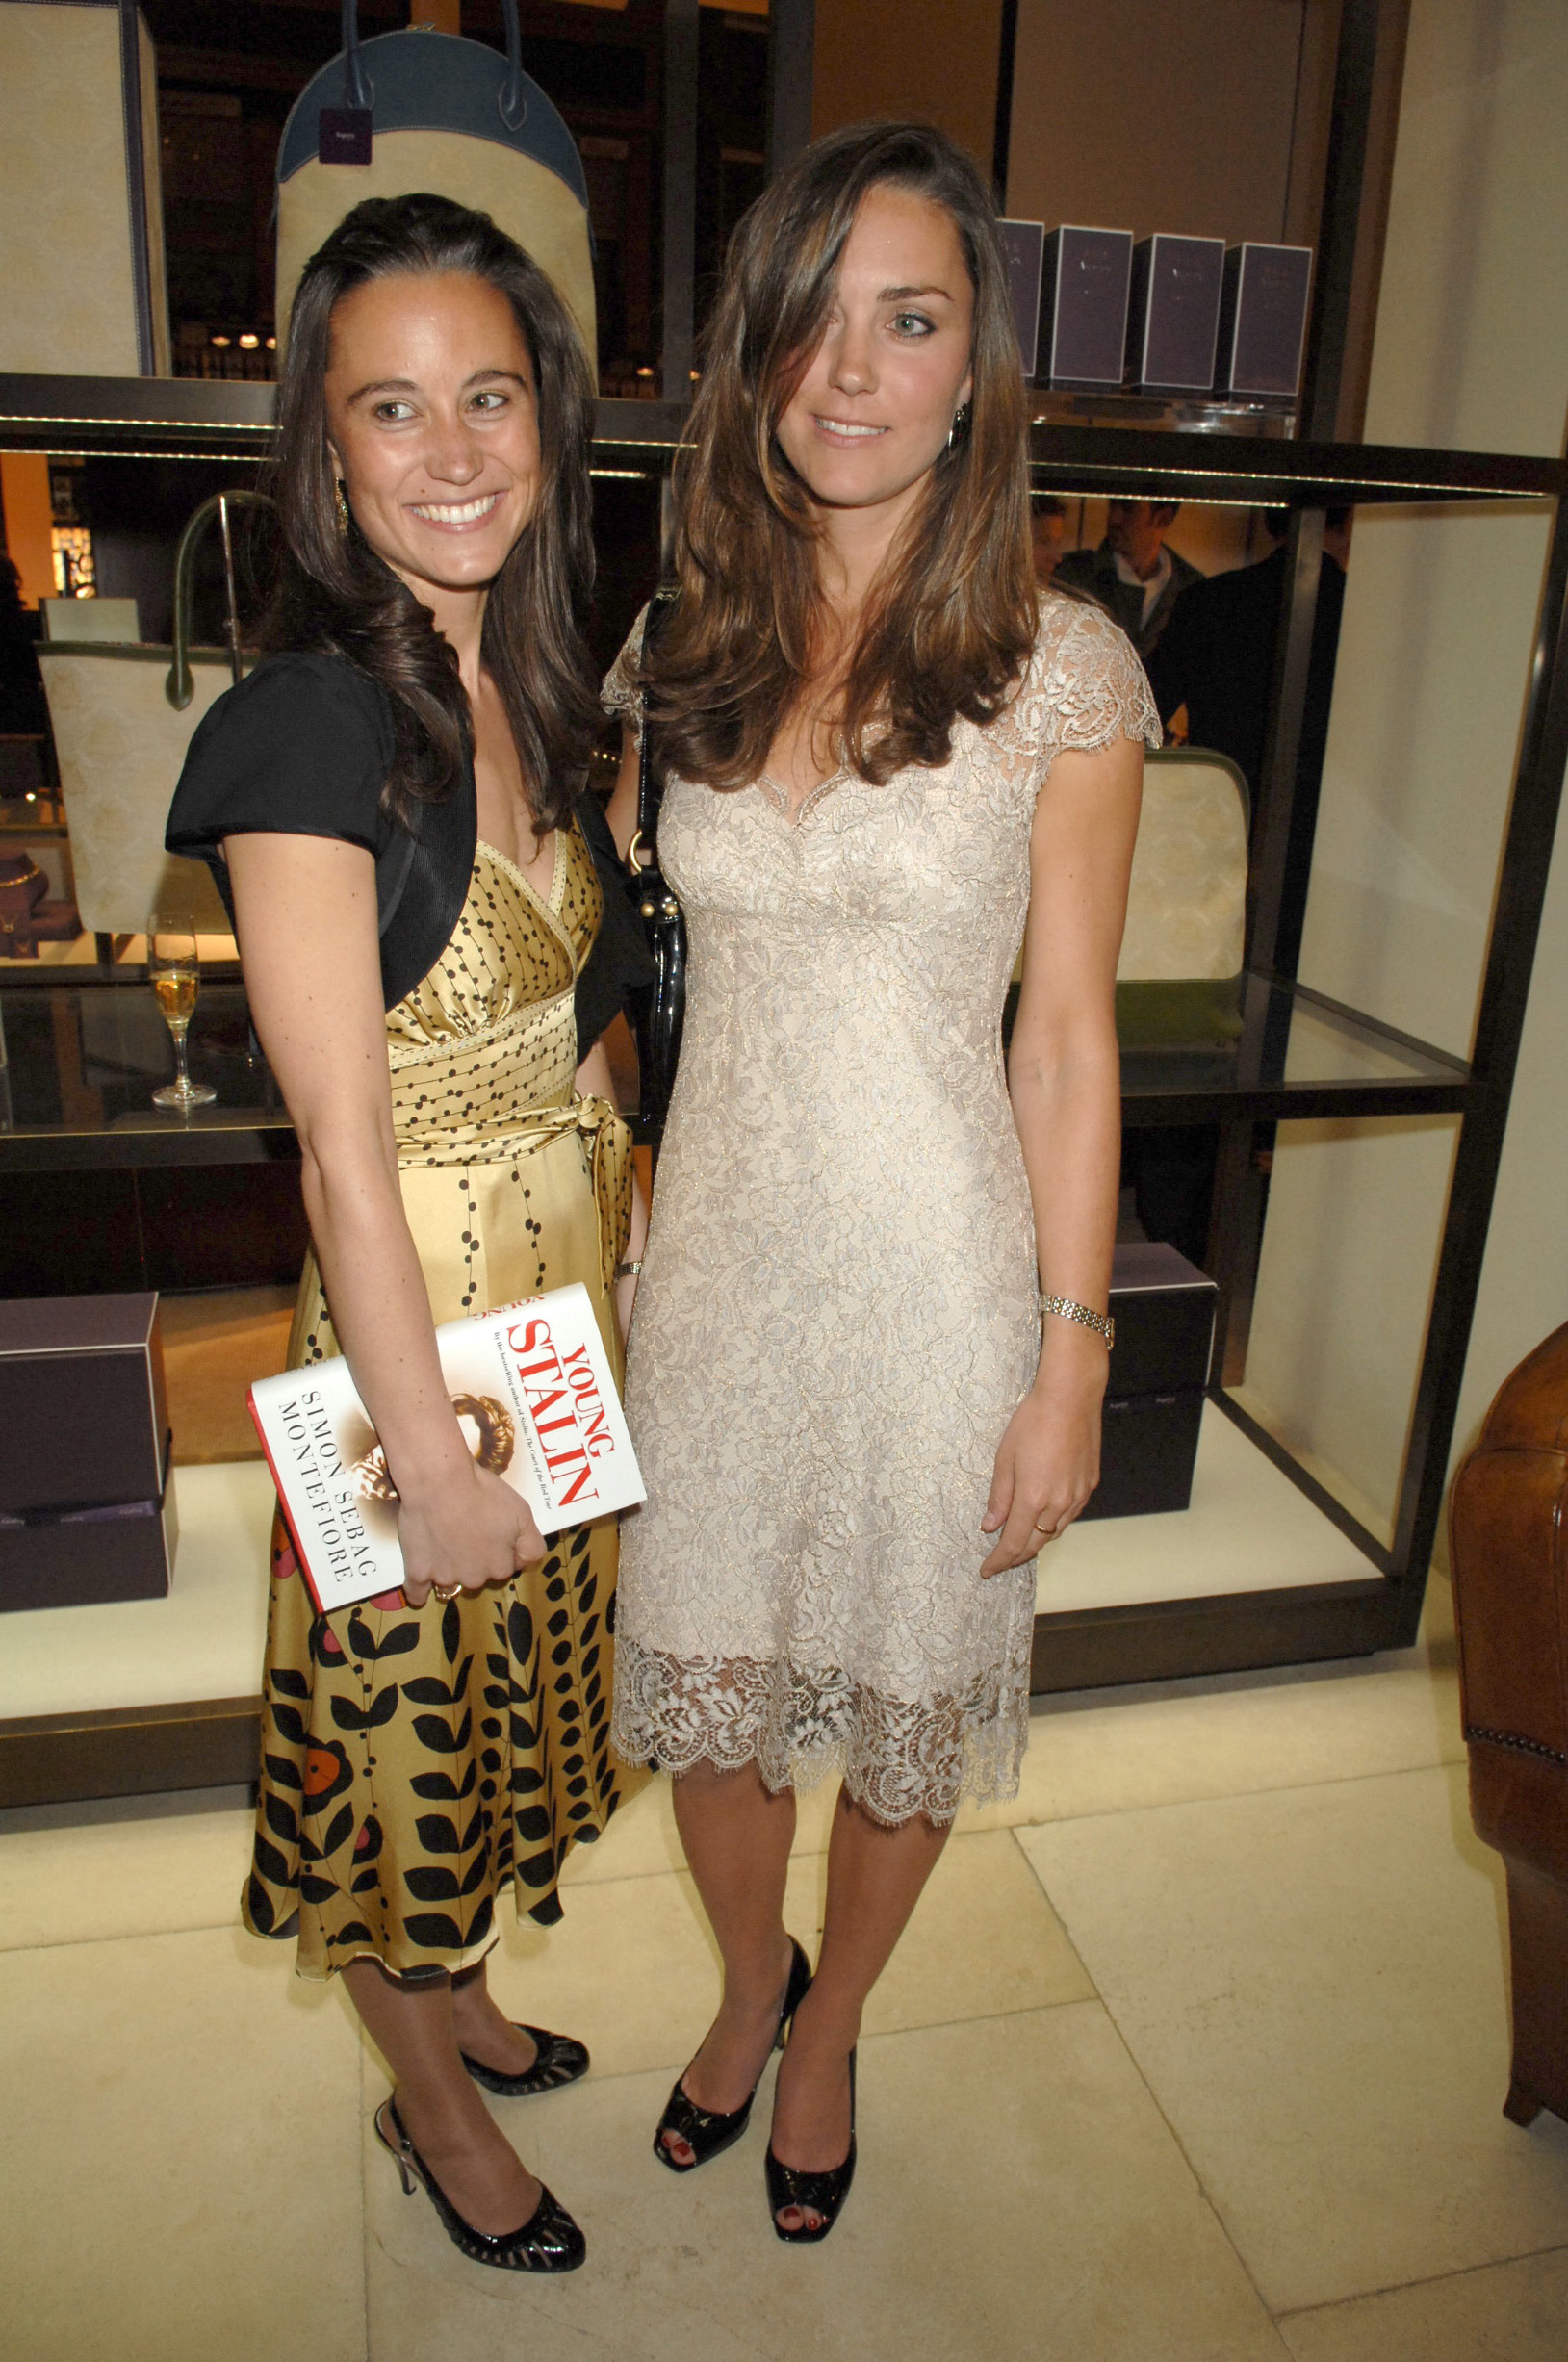 Pippa Middleton and Kate Middleton
Simon Sebag Montefiore's 'Young Stalin' book launch, Aspreys, London, Britain - 14 May 2007, Image: 221350764, License: Rights-managed, Restrictions: , Model Release: no, Credit line: Richard Young / Shutterstock Editorial / Profimedia